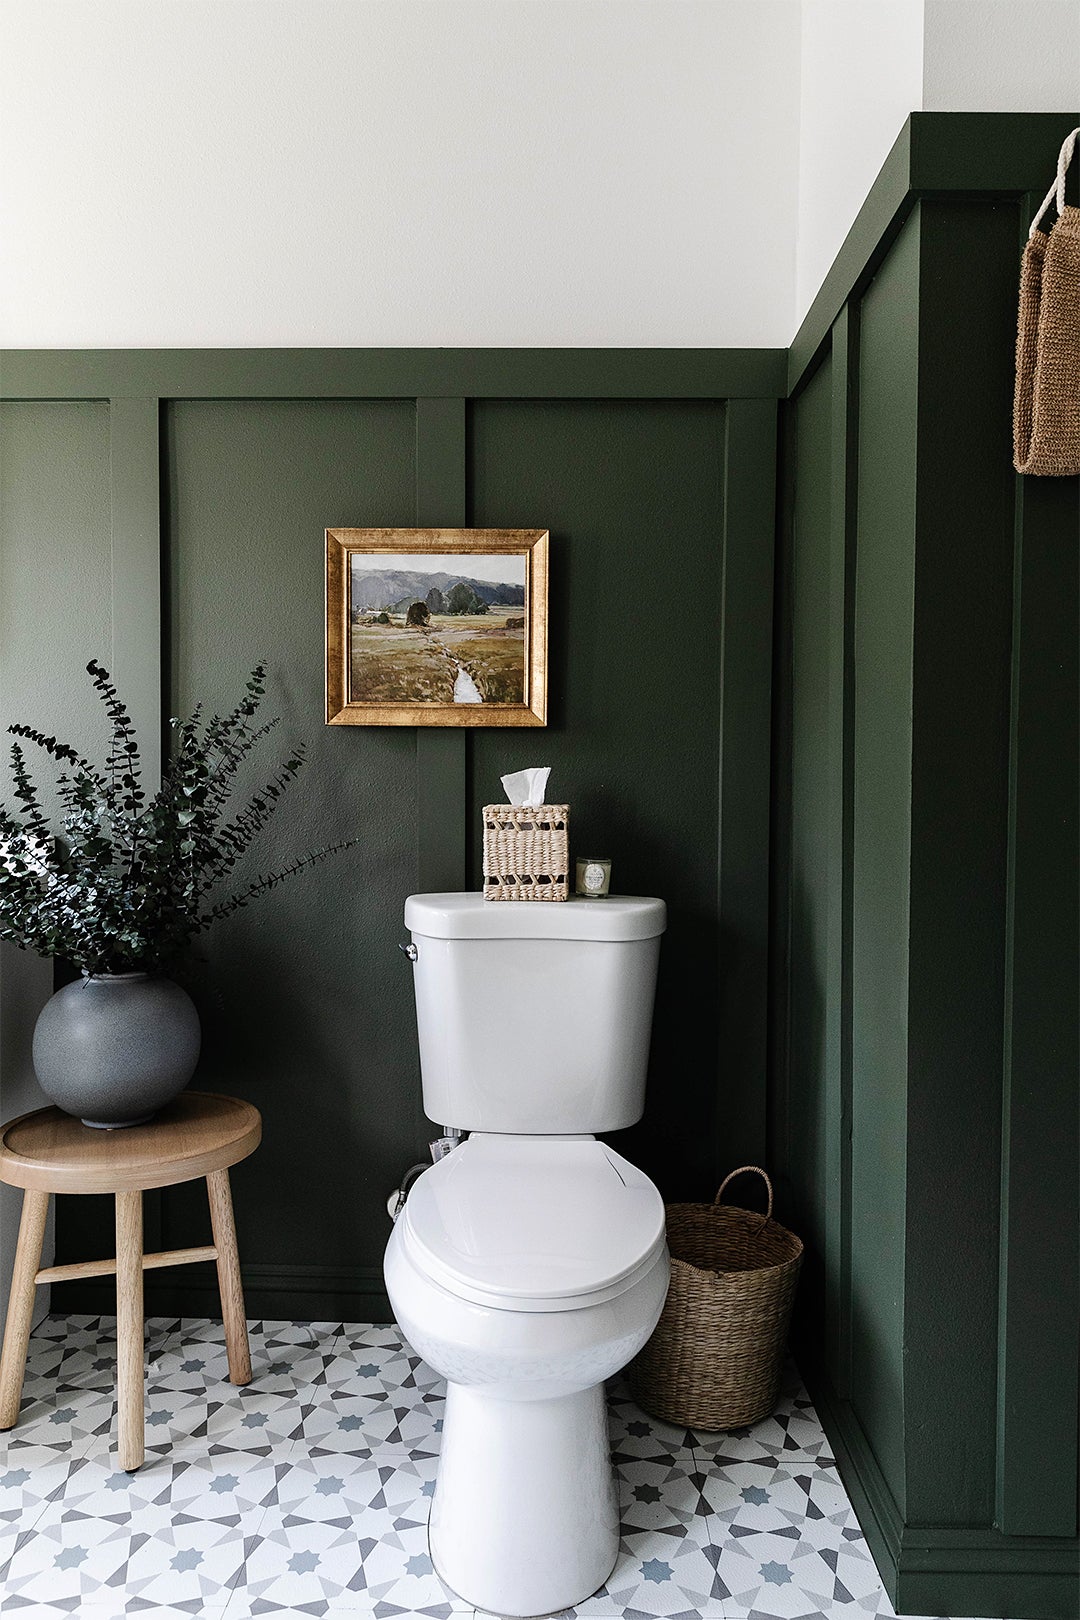 toilet with green wall panels behidn it